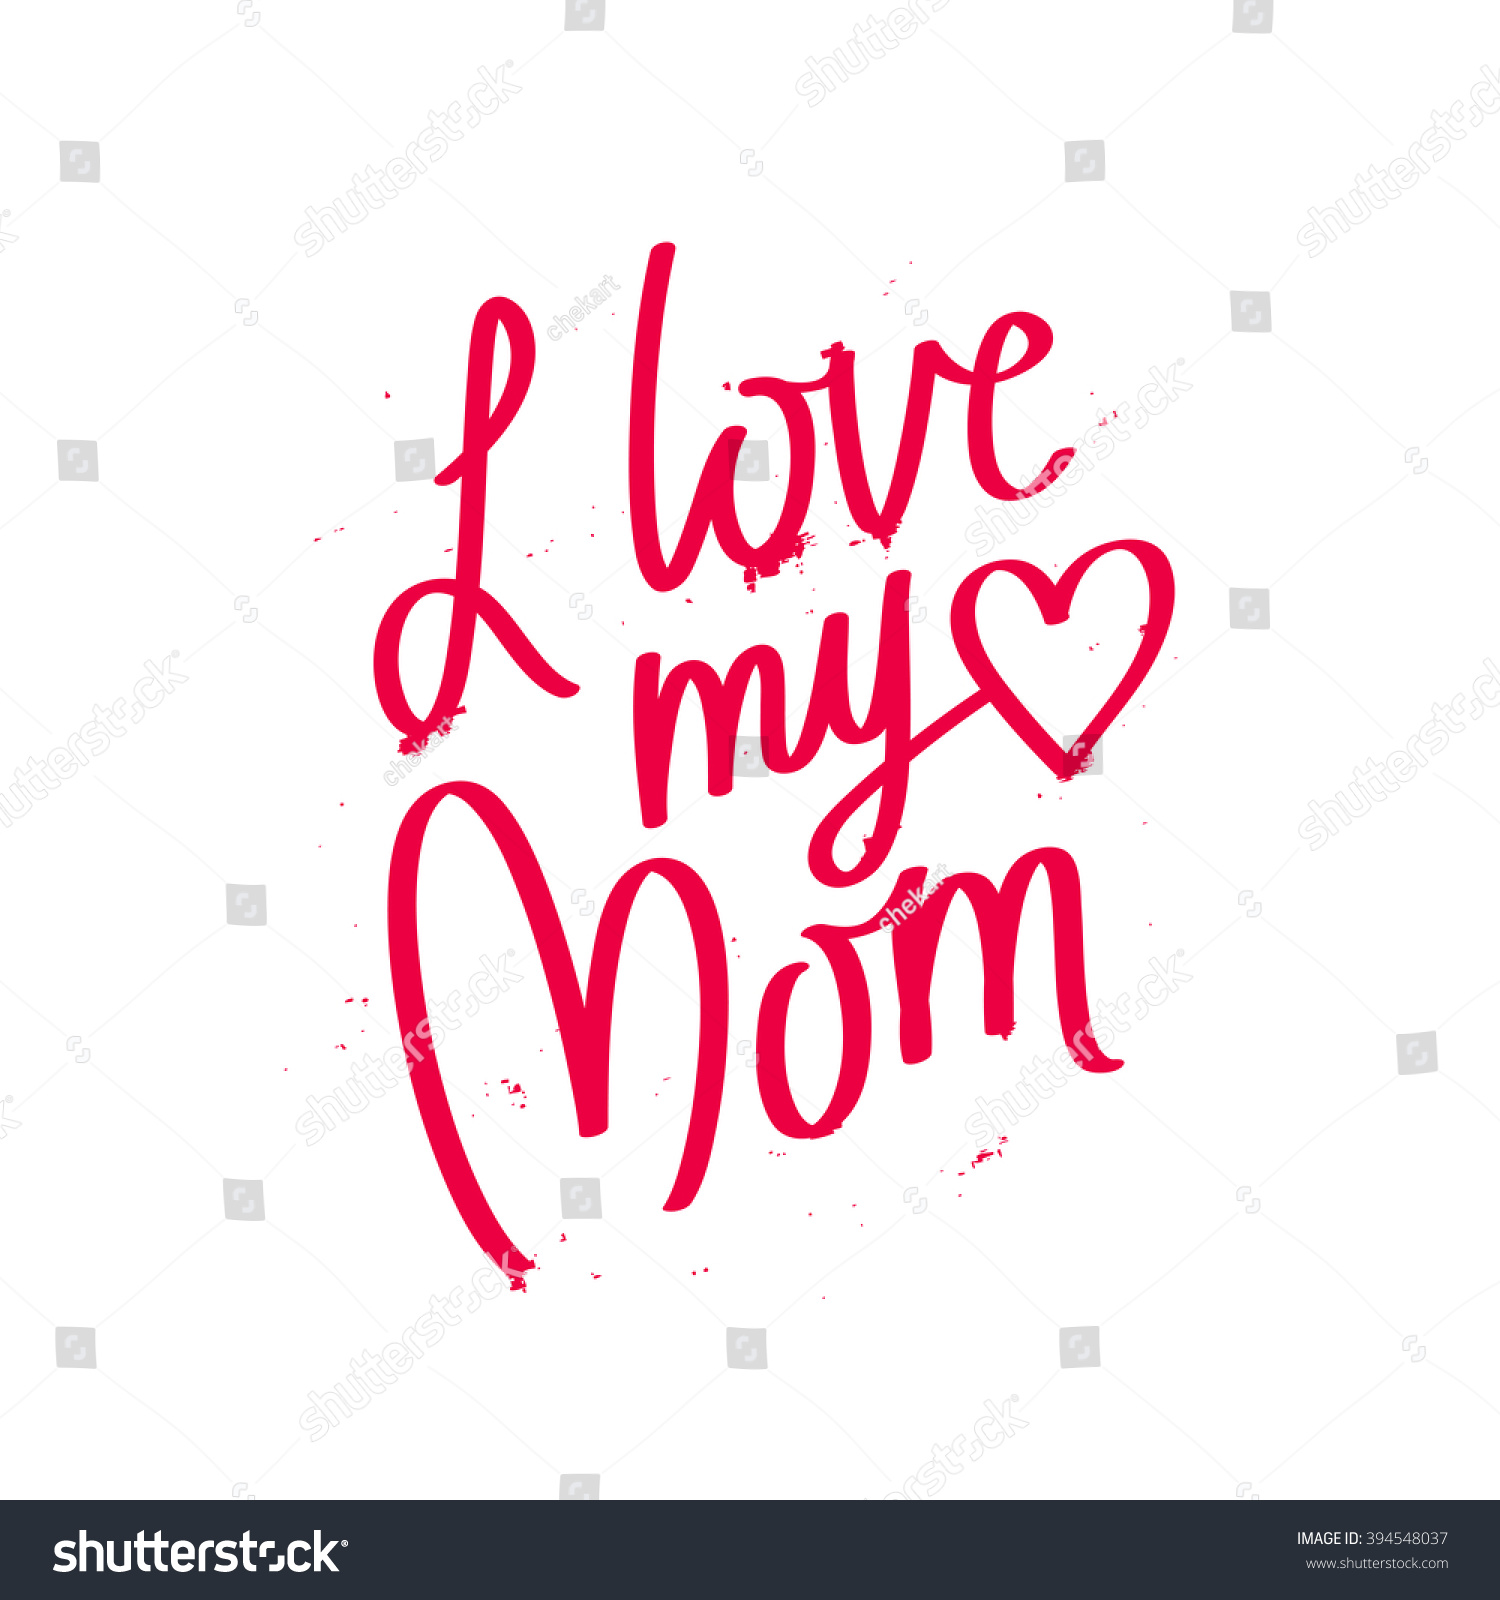 Quote "I love my Mom " Excellent holiday card Vector illustration on white